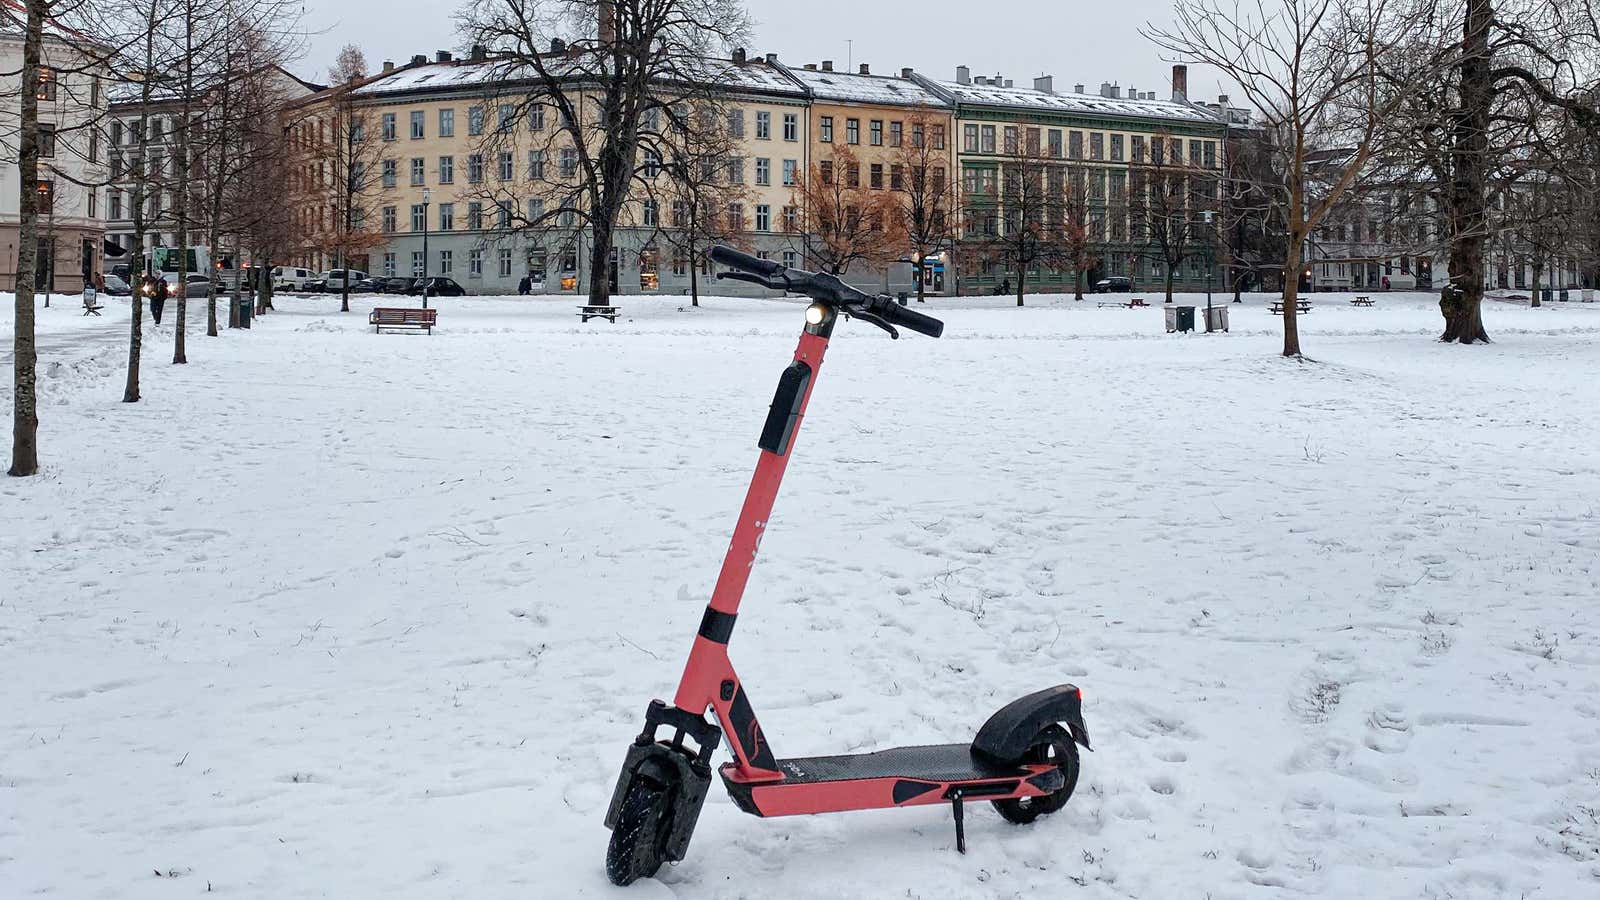 Scooter company Voi operated through snow in Oslo last week.